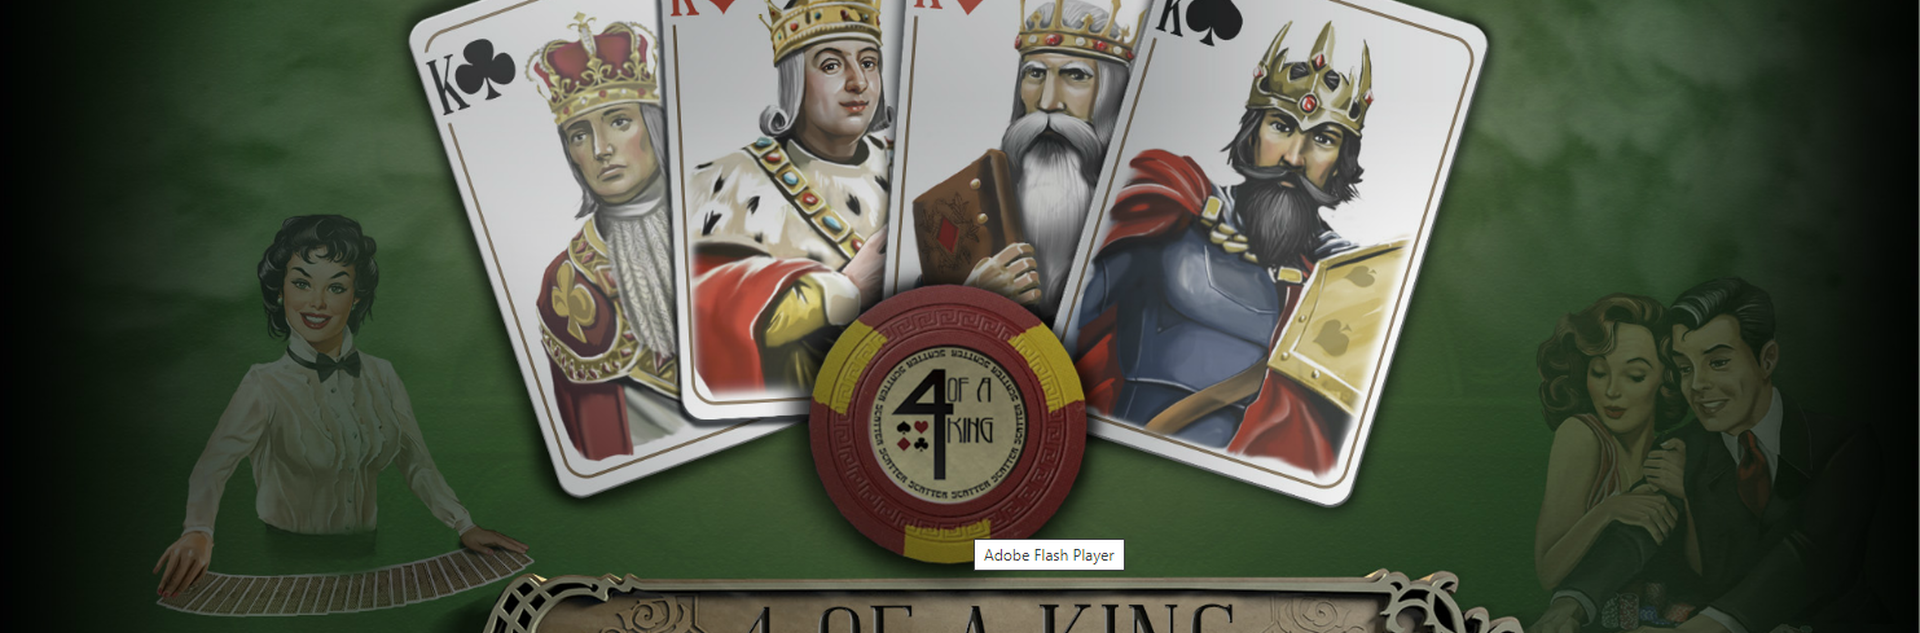 4 of a King Slot